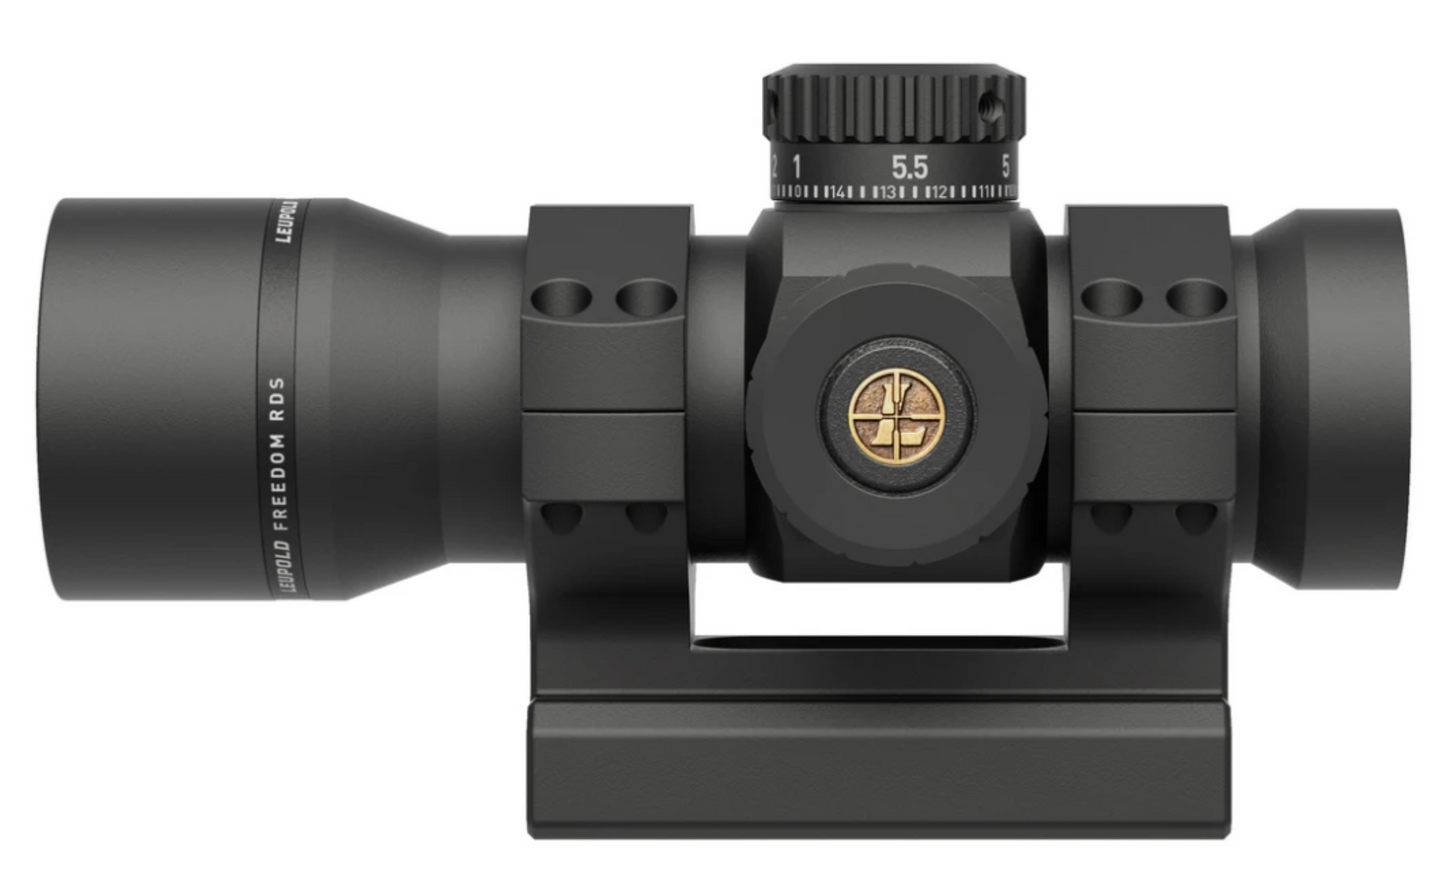 Leupold Freedom RDS BDC Red Dot Sight w/ Mount